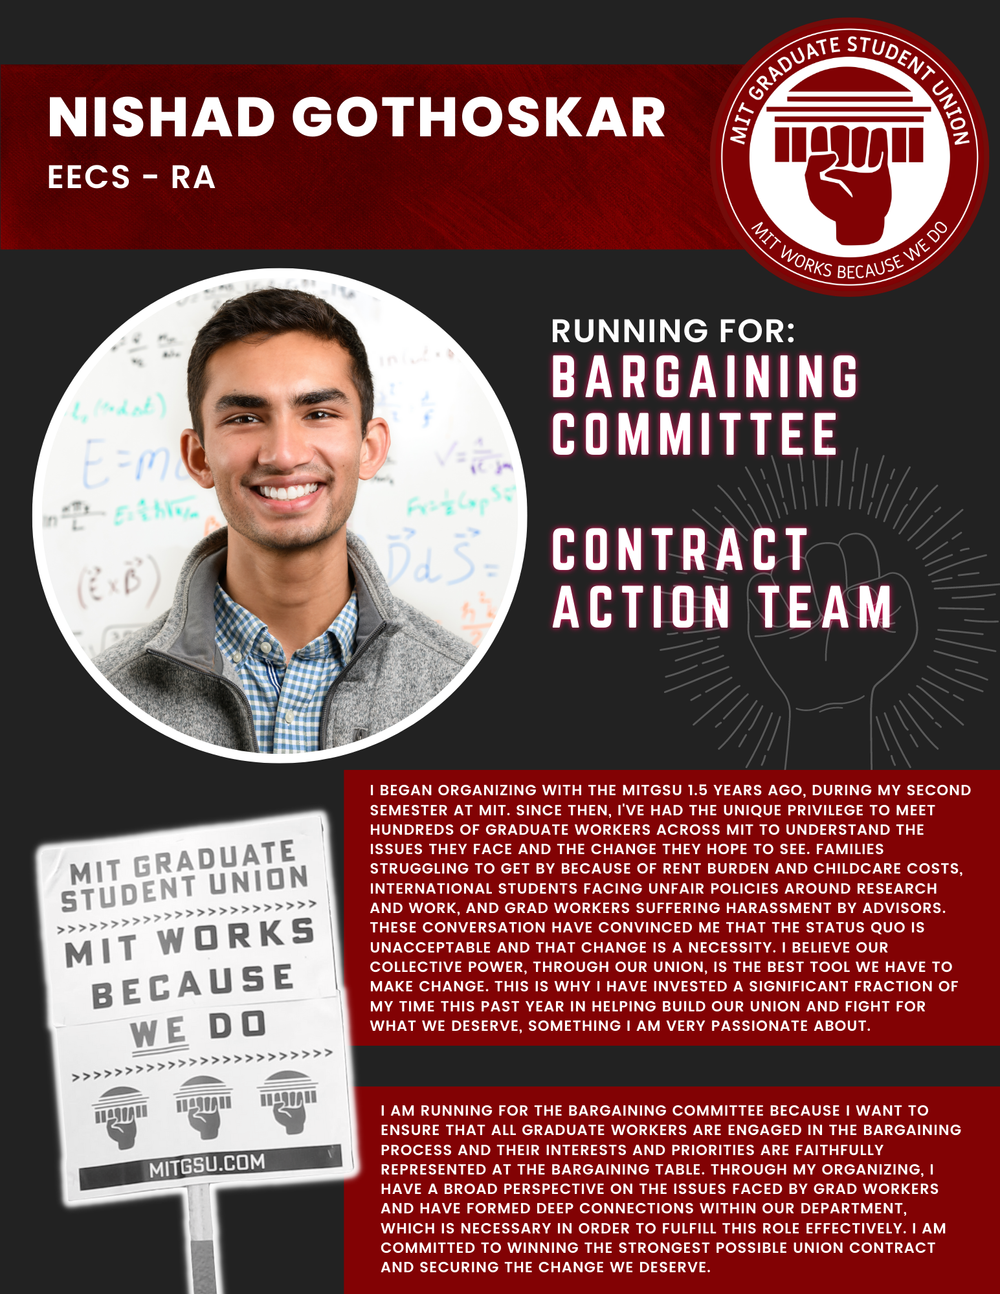  NISHAD GOTHOSKAR EECS - RA   RUNNING FOR: Bargaining Committee  Contract Action Team  I BEGAN ORGANIZING WITH THE MITGSU 1.5 YEARS AGO, DURING MY SECOND SEMESTER AT MIT. SINCE THEN, I'VE HAD THE UNIQUE PRIVILEGE TO MEET HUNDREDS OF GRADUATE WORKERS 